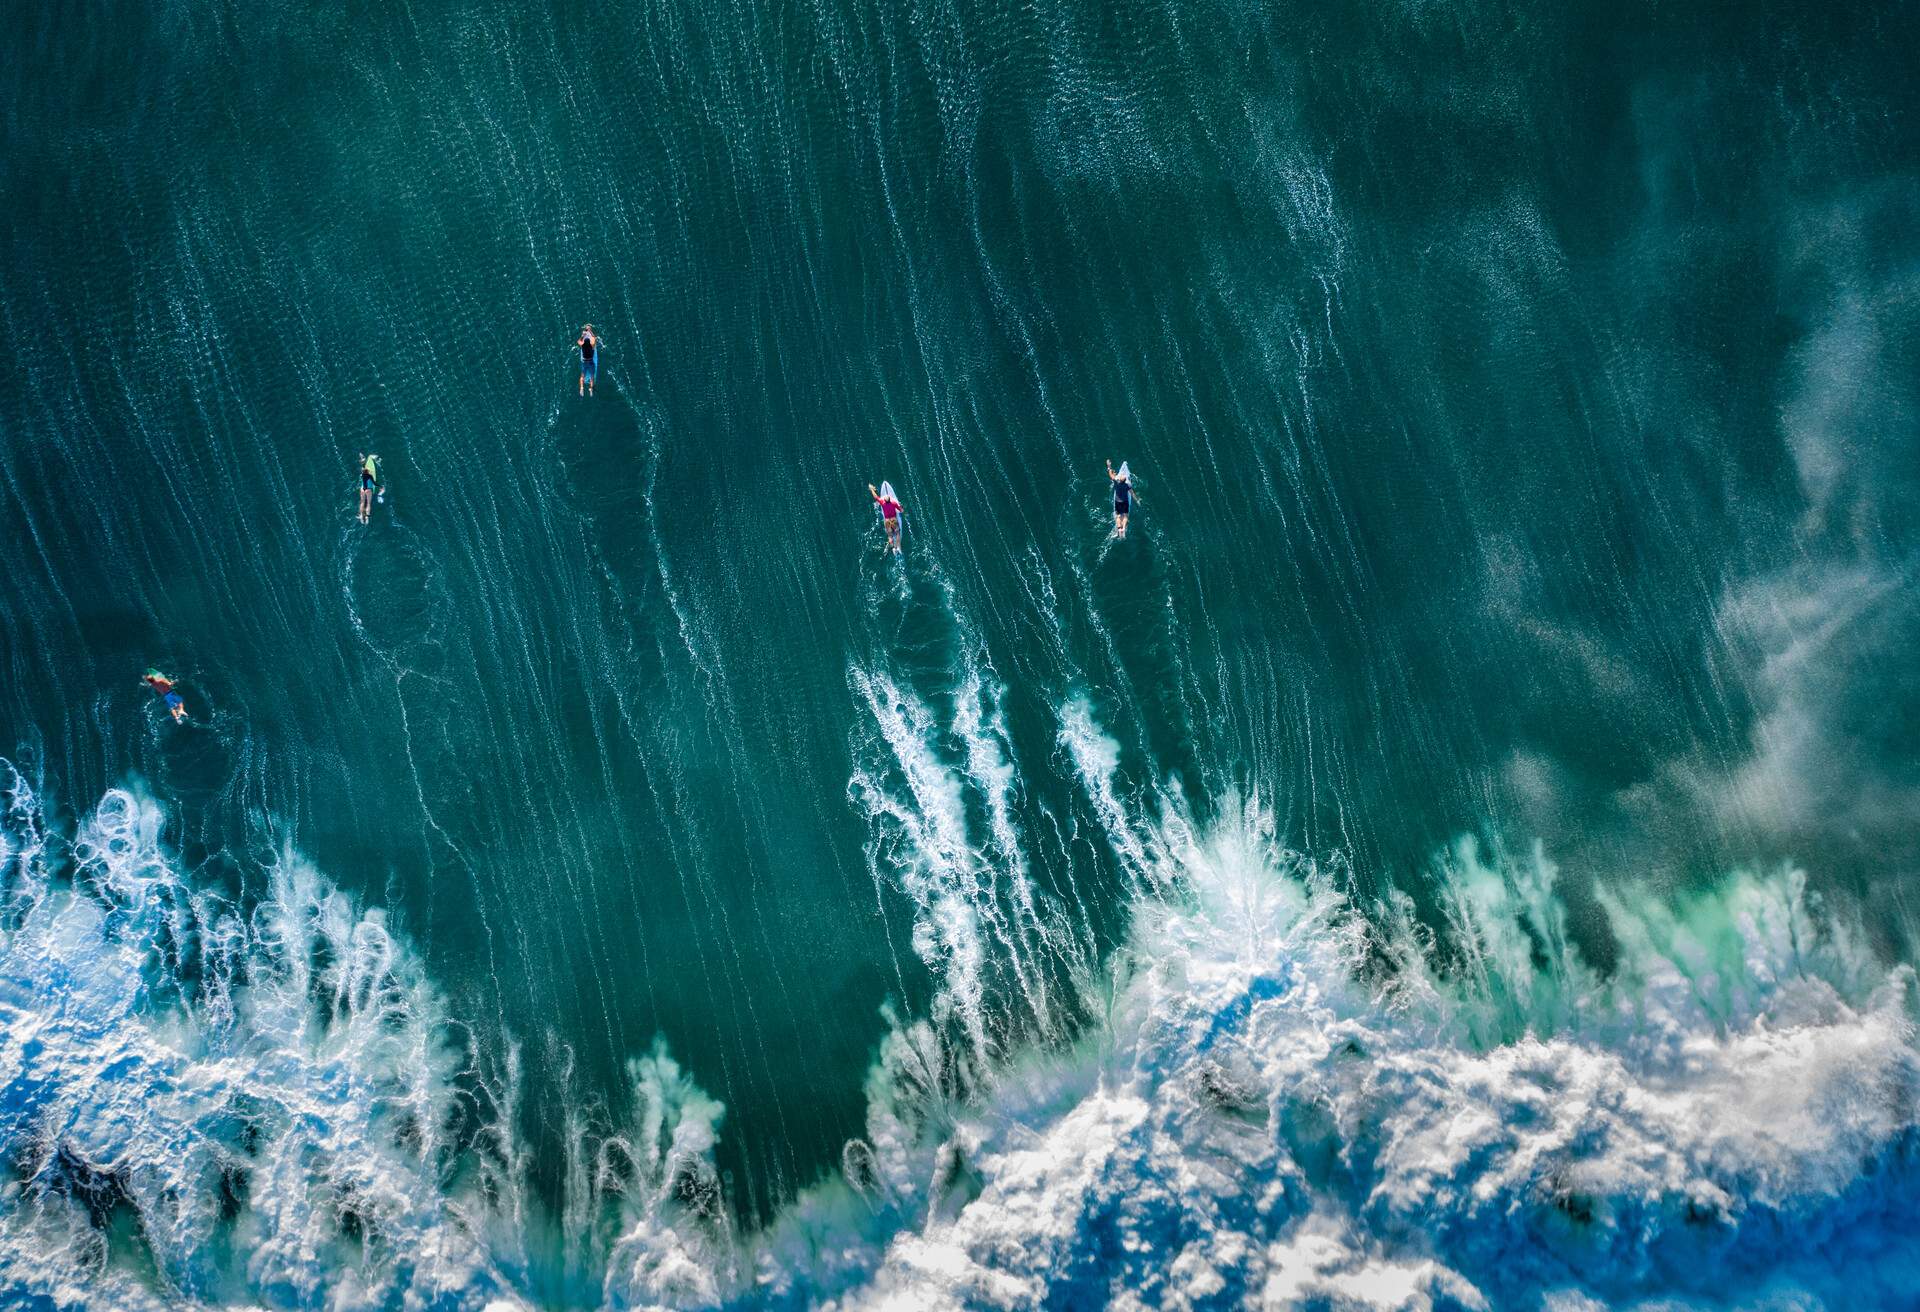 View directly above of a small group of surfers paddling through massive tidal waves to capture the next waves in Bali Indonesia.